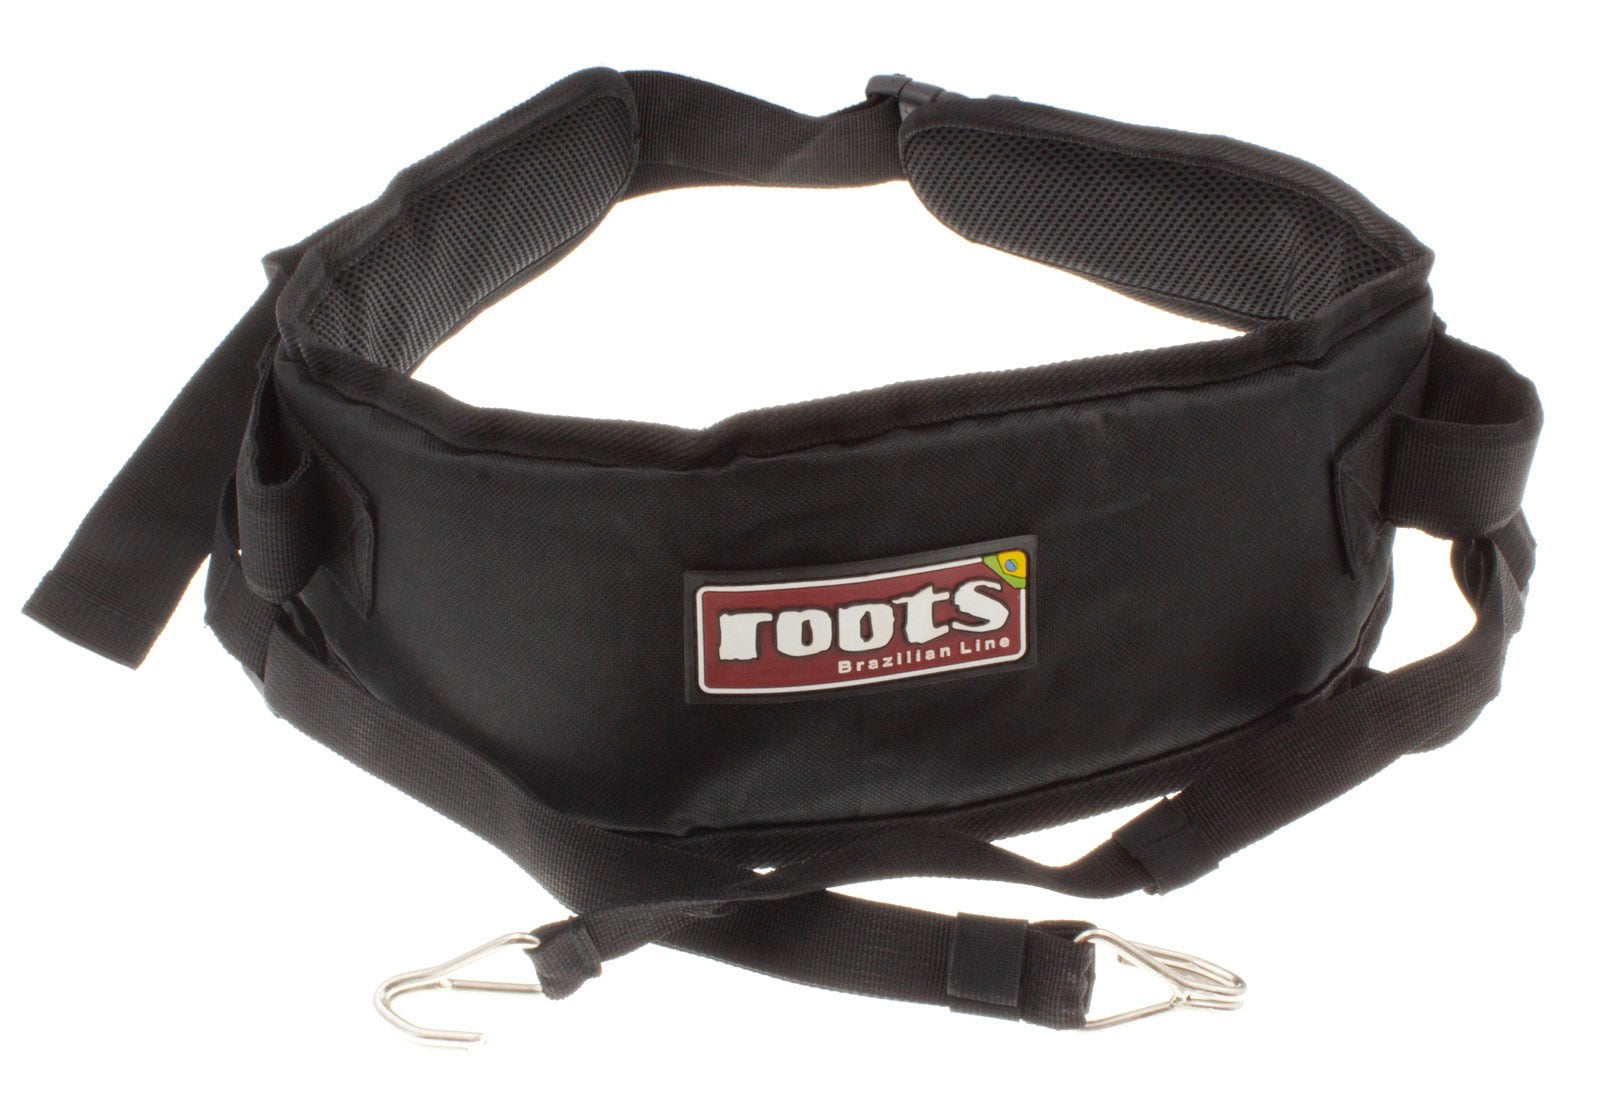 ROOTS PERCUSSION DELUXE HARNESS STRAP DJEMBE SURDO 2 REINFORCED HOOKS MULTI PERCUSSION SIZE S